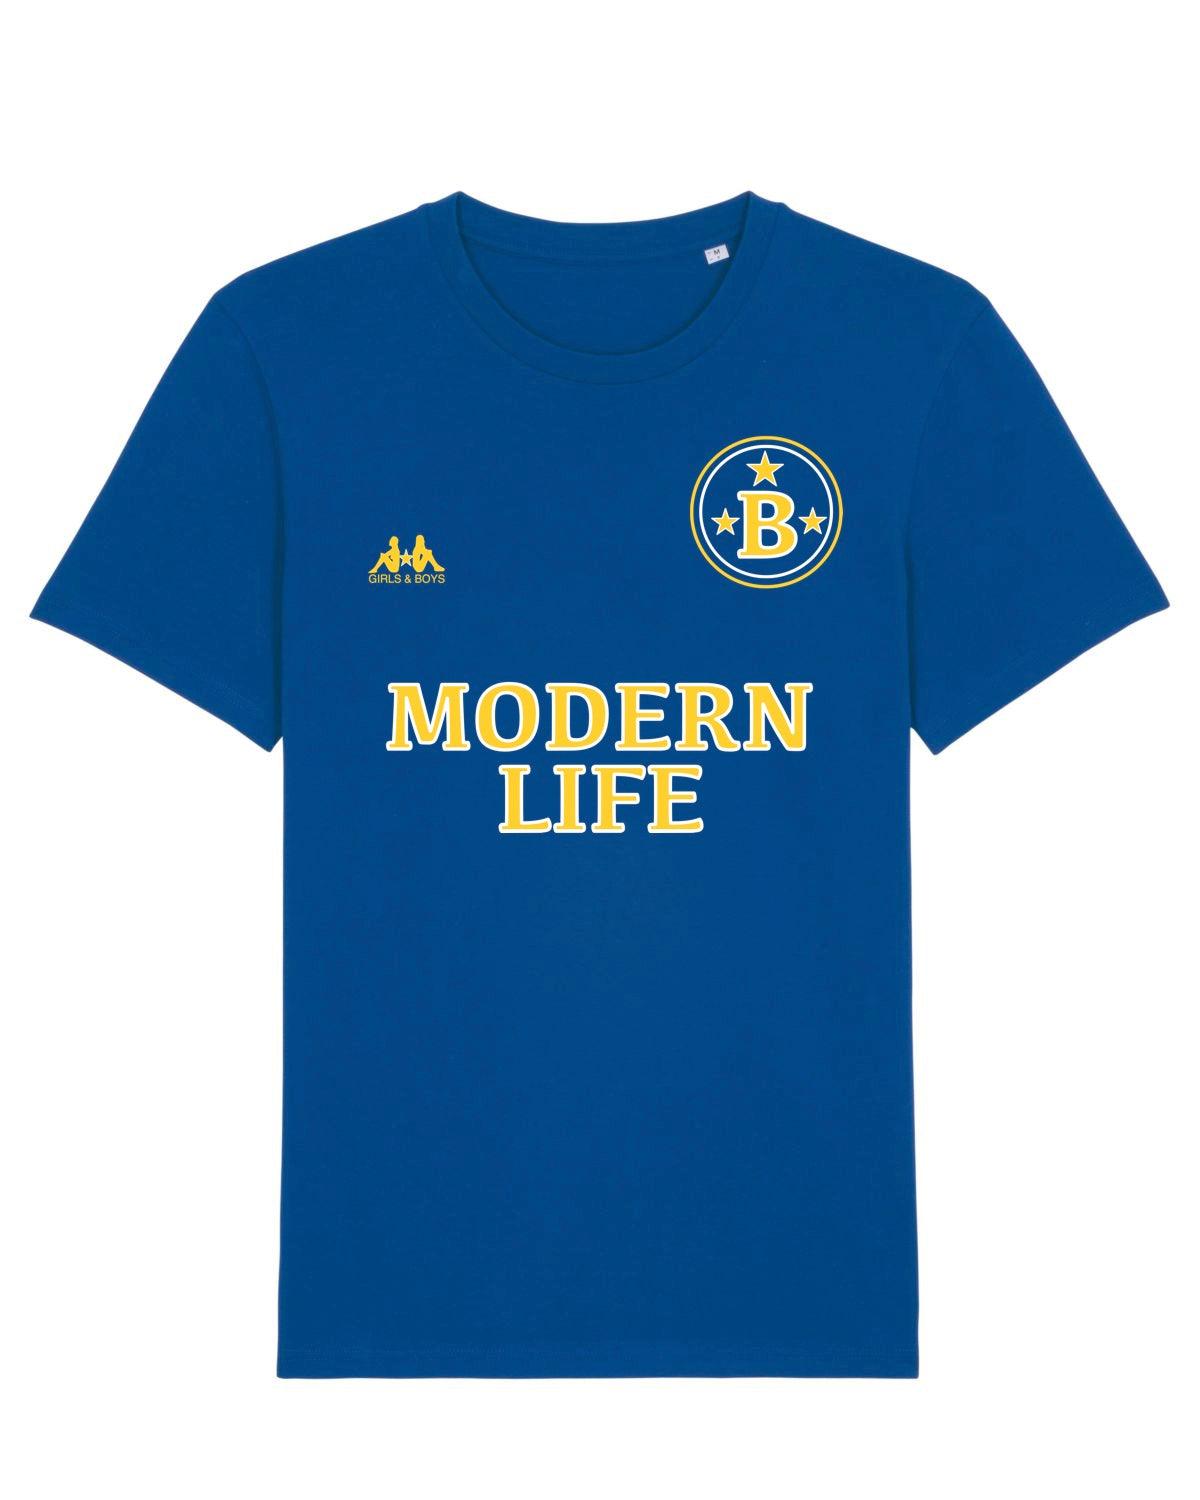 MODERN LIFE: T-Shirt Inspired by Blur (3 Colour Options) - SOUND IS COLOUR